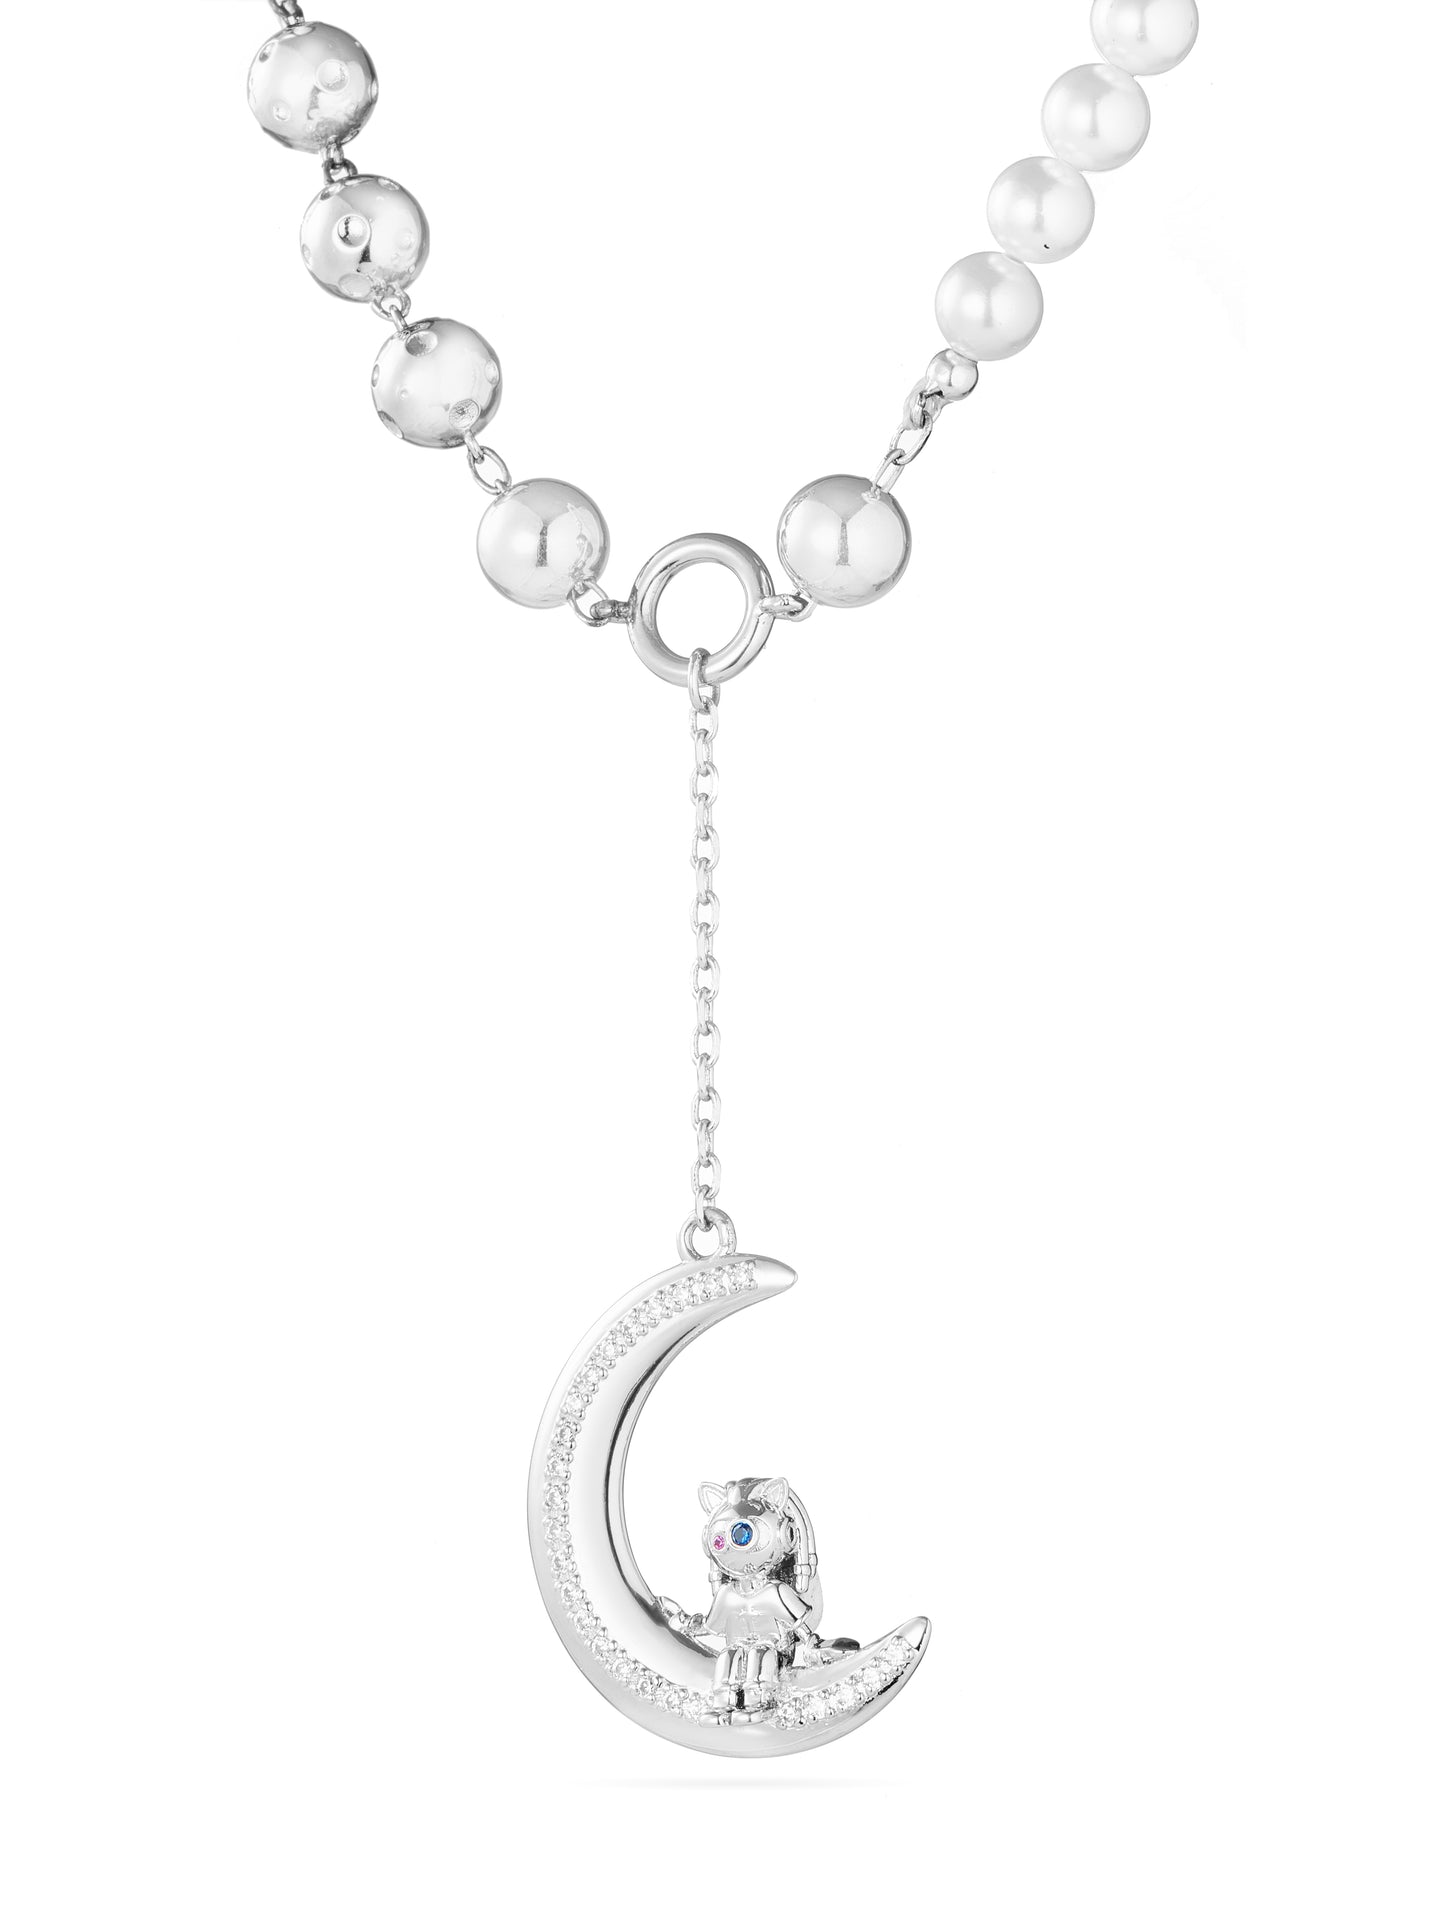 Planet Series - TATA Moon Pearl Necklace